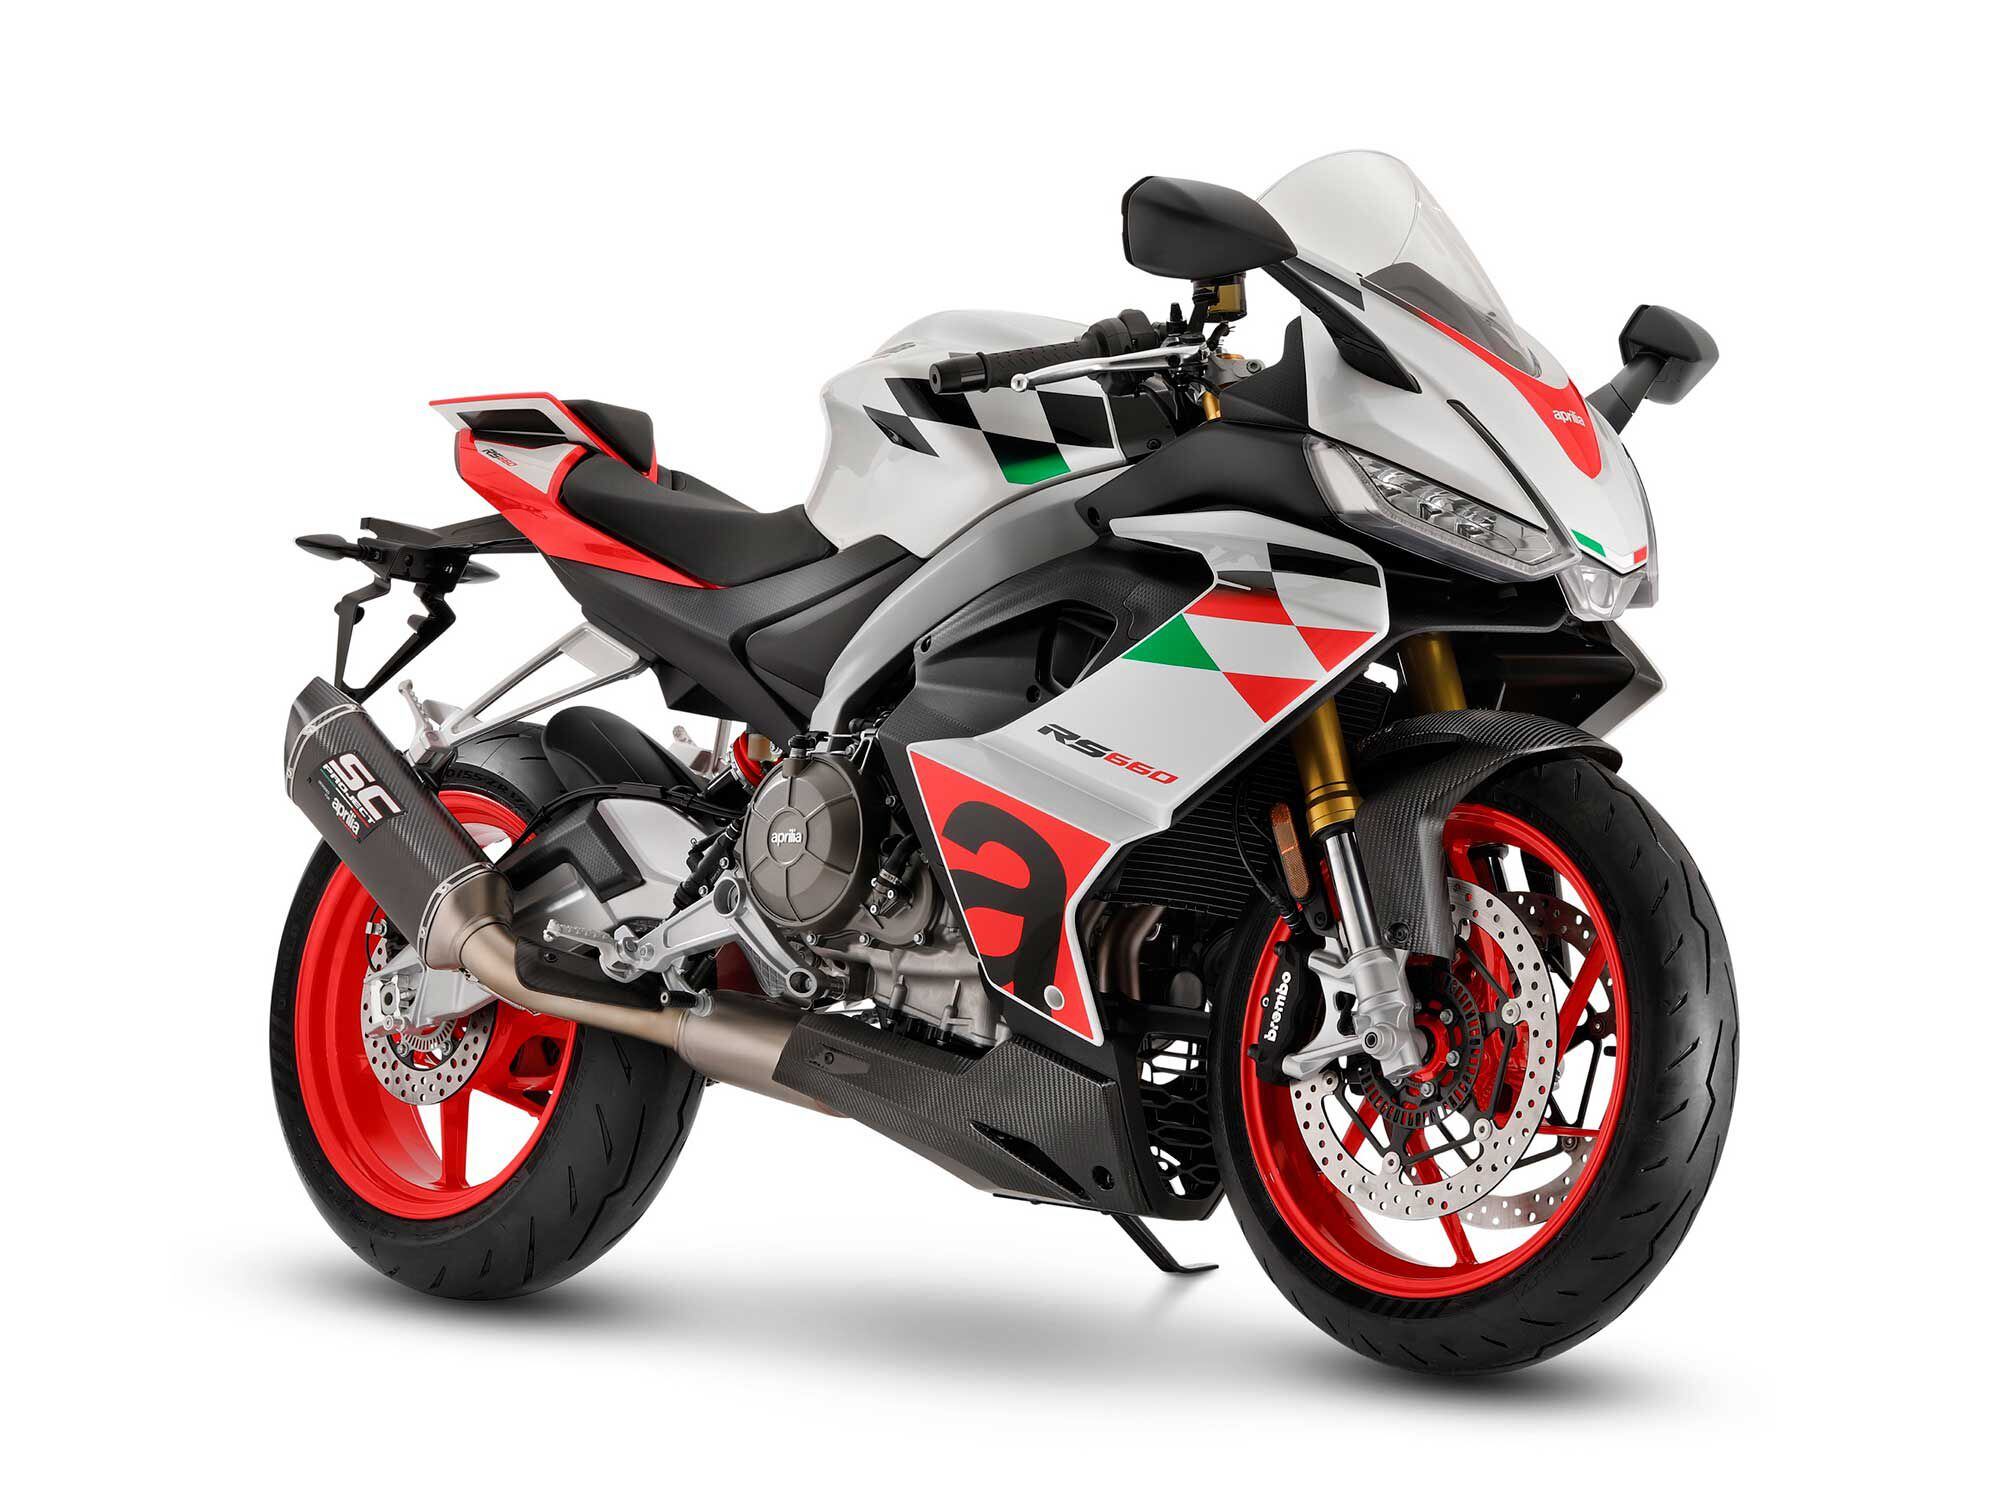 The 2023 Aprilia RS 660 Extrema pays homage to the Aprilia 125 Extrema produced between 1992 and 1994.